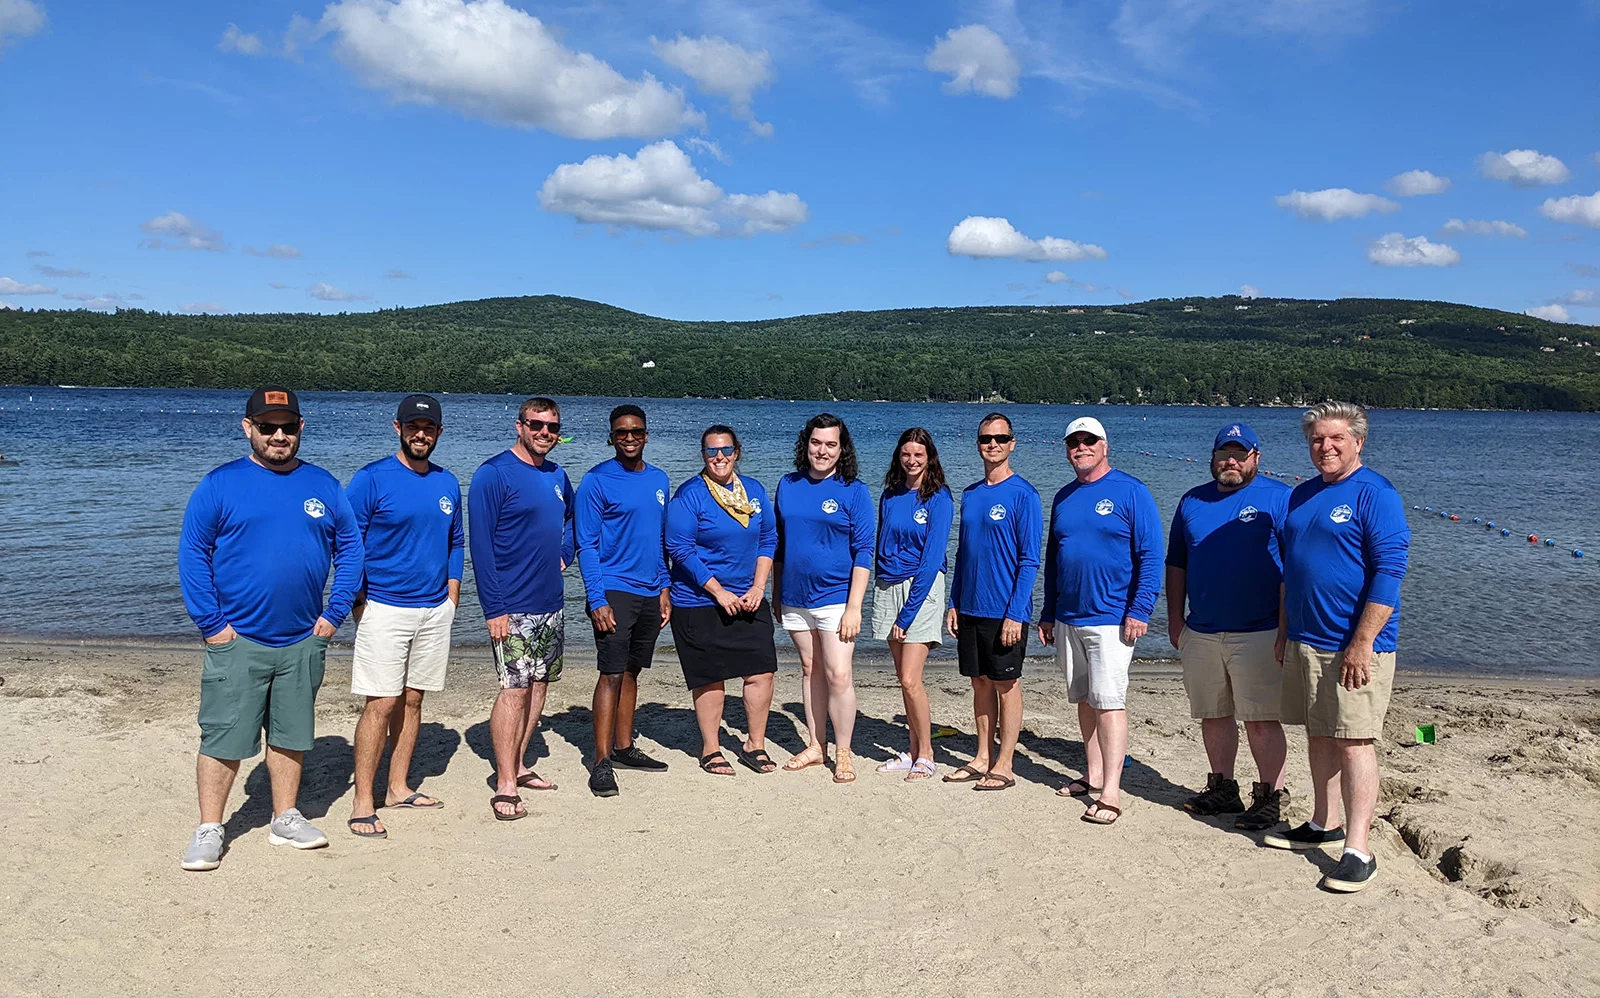 Lake Sunapee with the FirstTracks Marketing Team